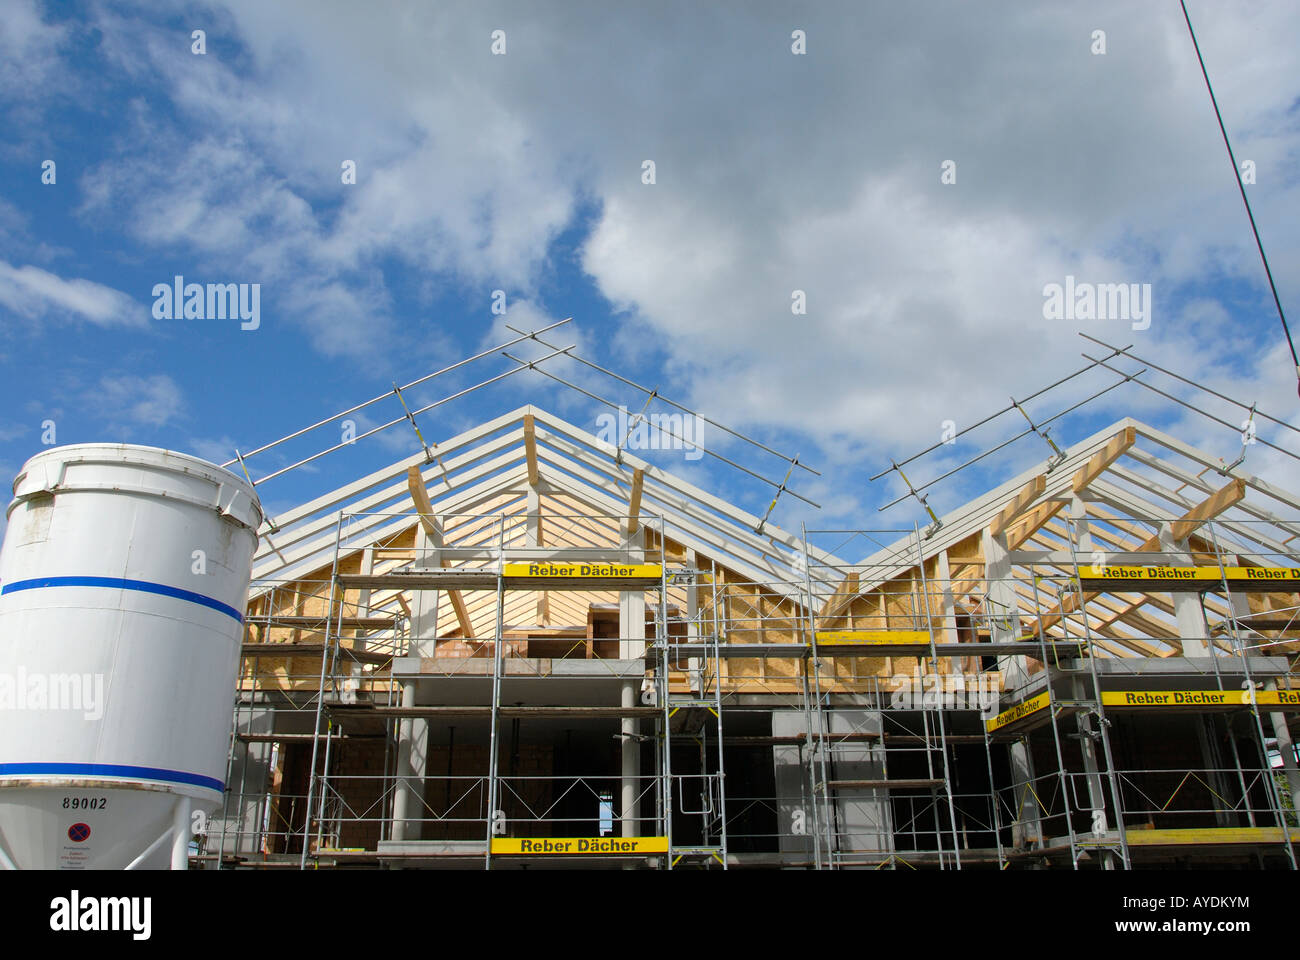 Building site on the coutryside Stock Photo